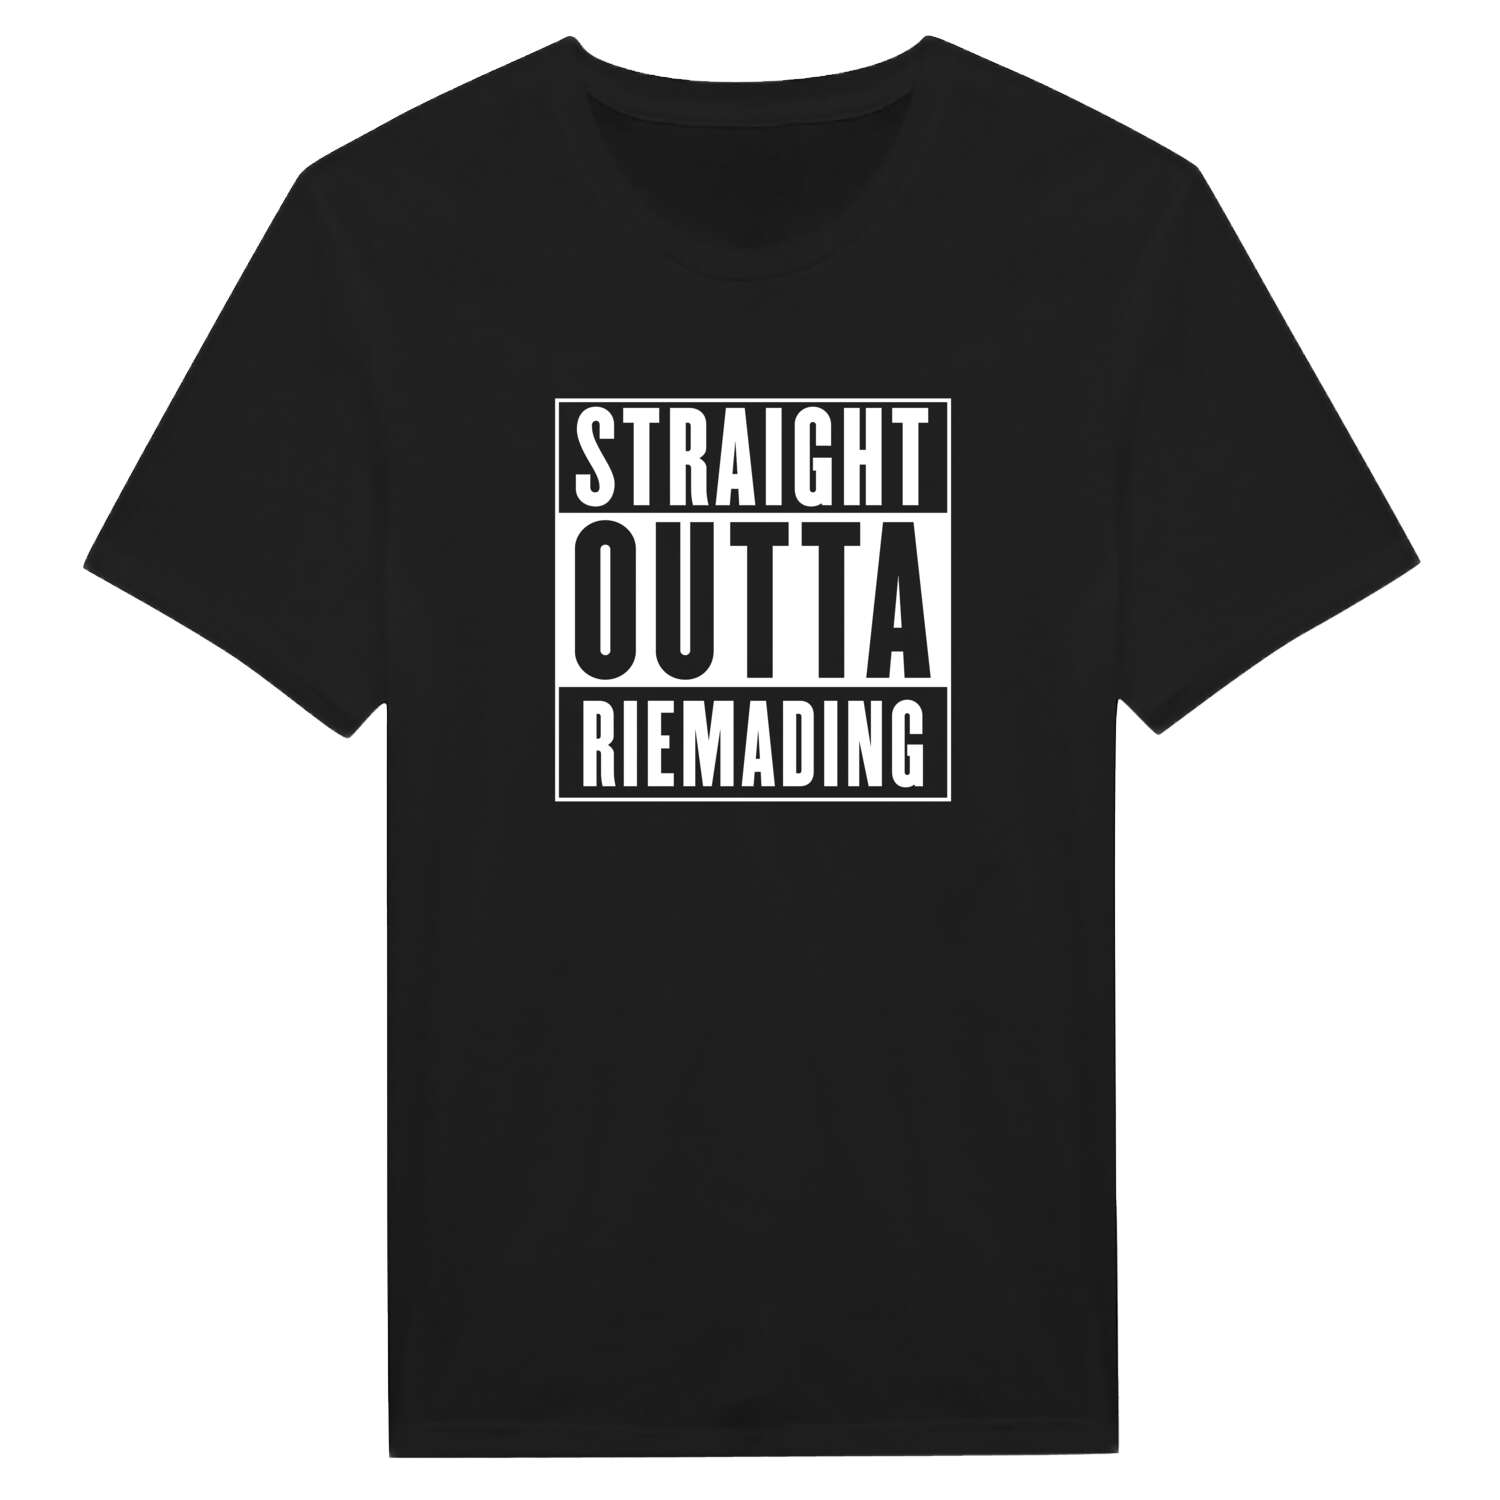 Riemading T-Shirt »Straight Outta«